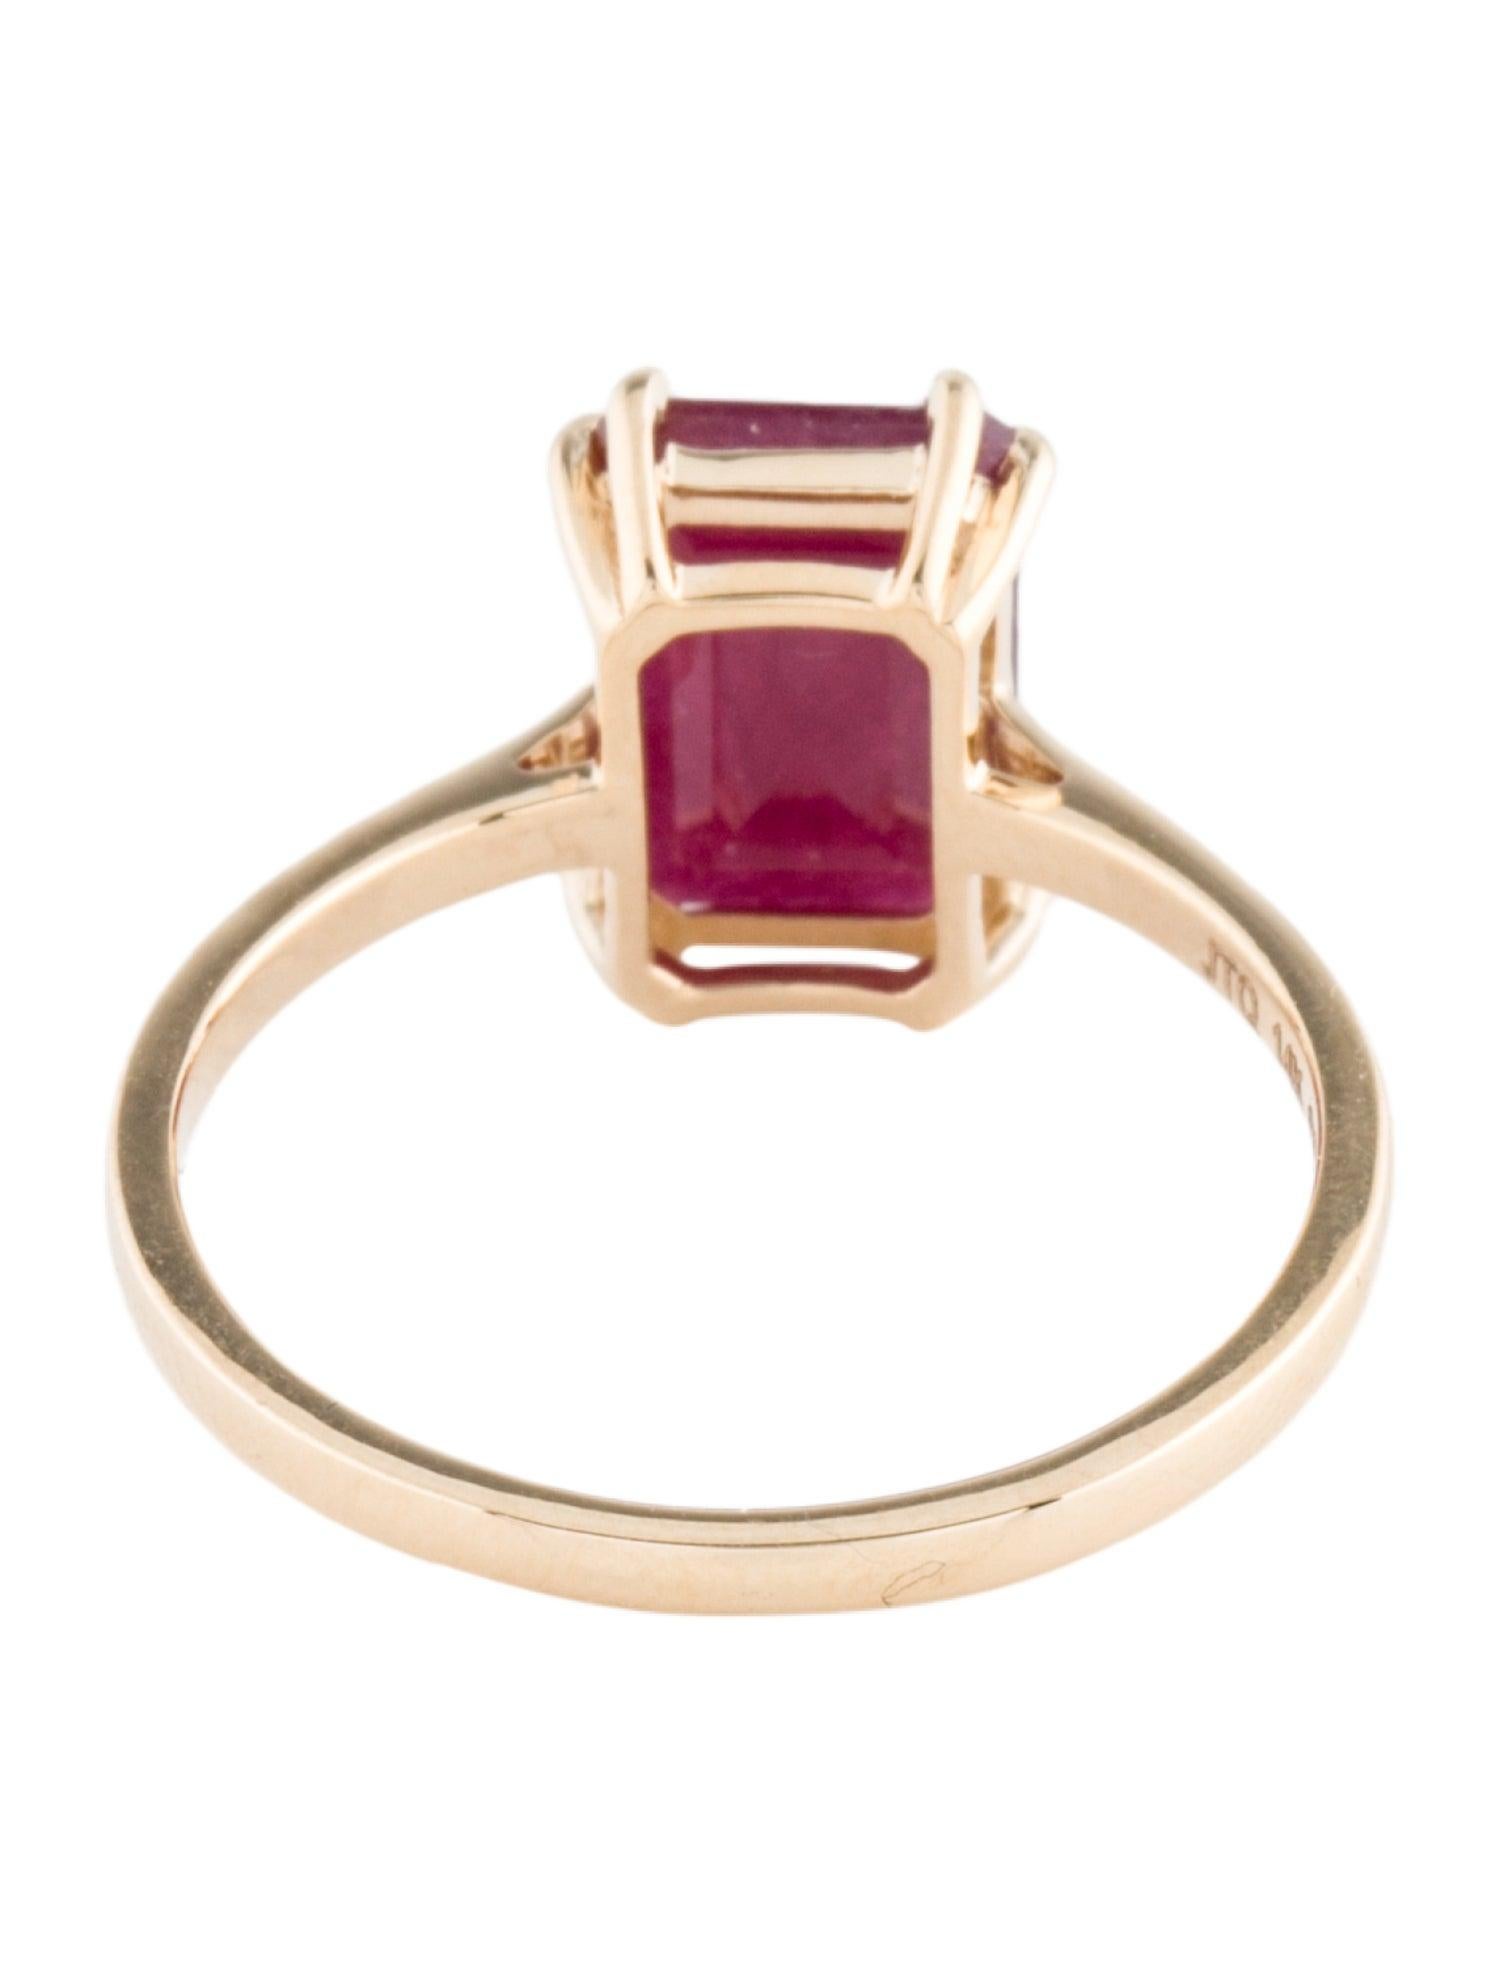 Brilliant Cut Captivating 14K Gold 2.02ct Ruby Cocktail Ring - Size 7 - Fine Gemstone Jewelry For Sale